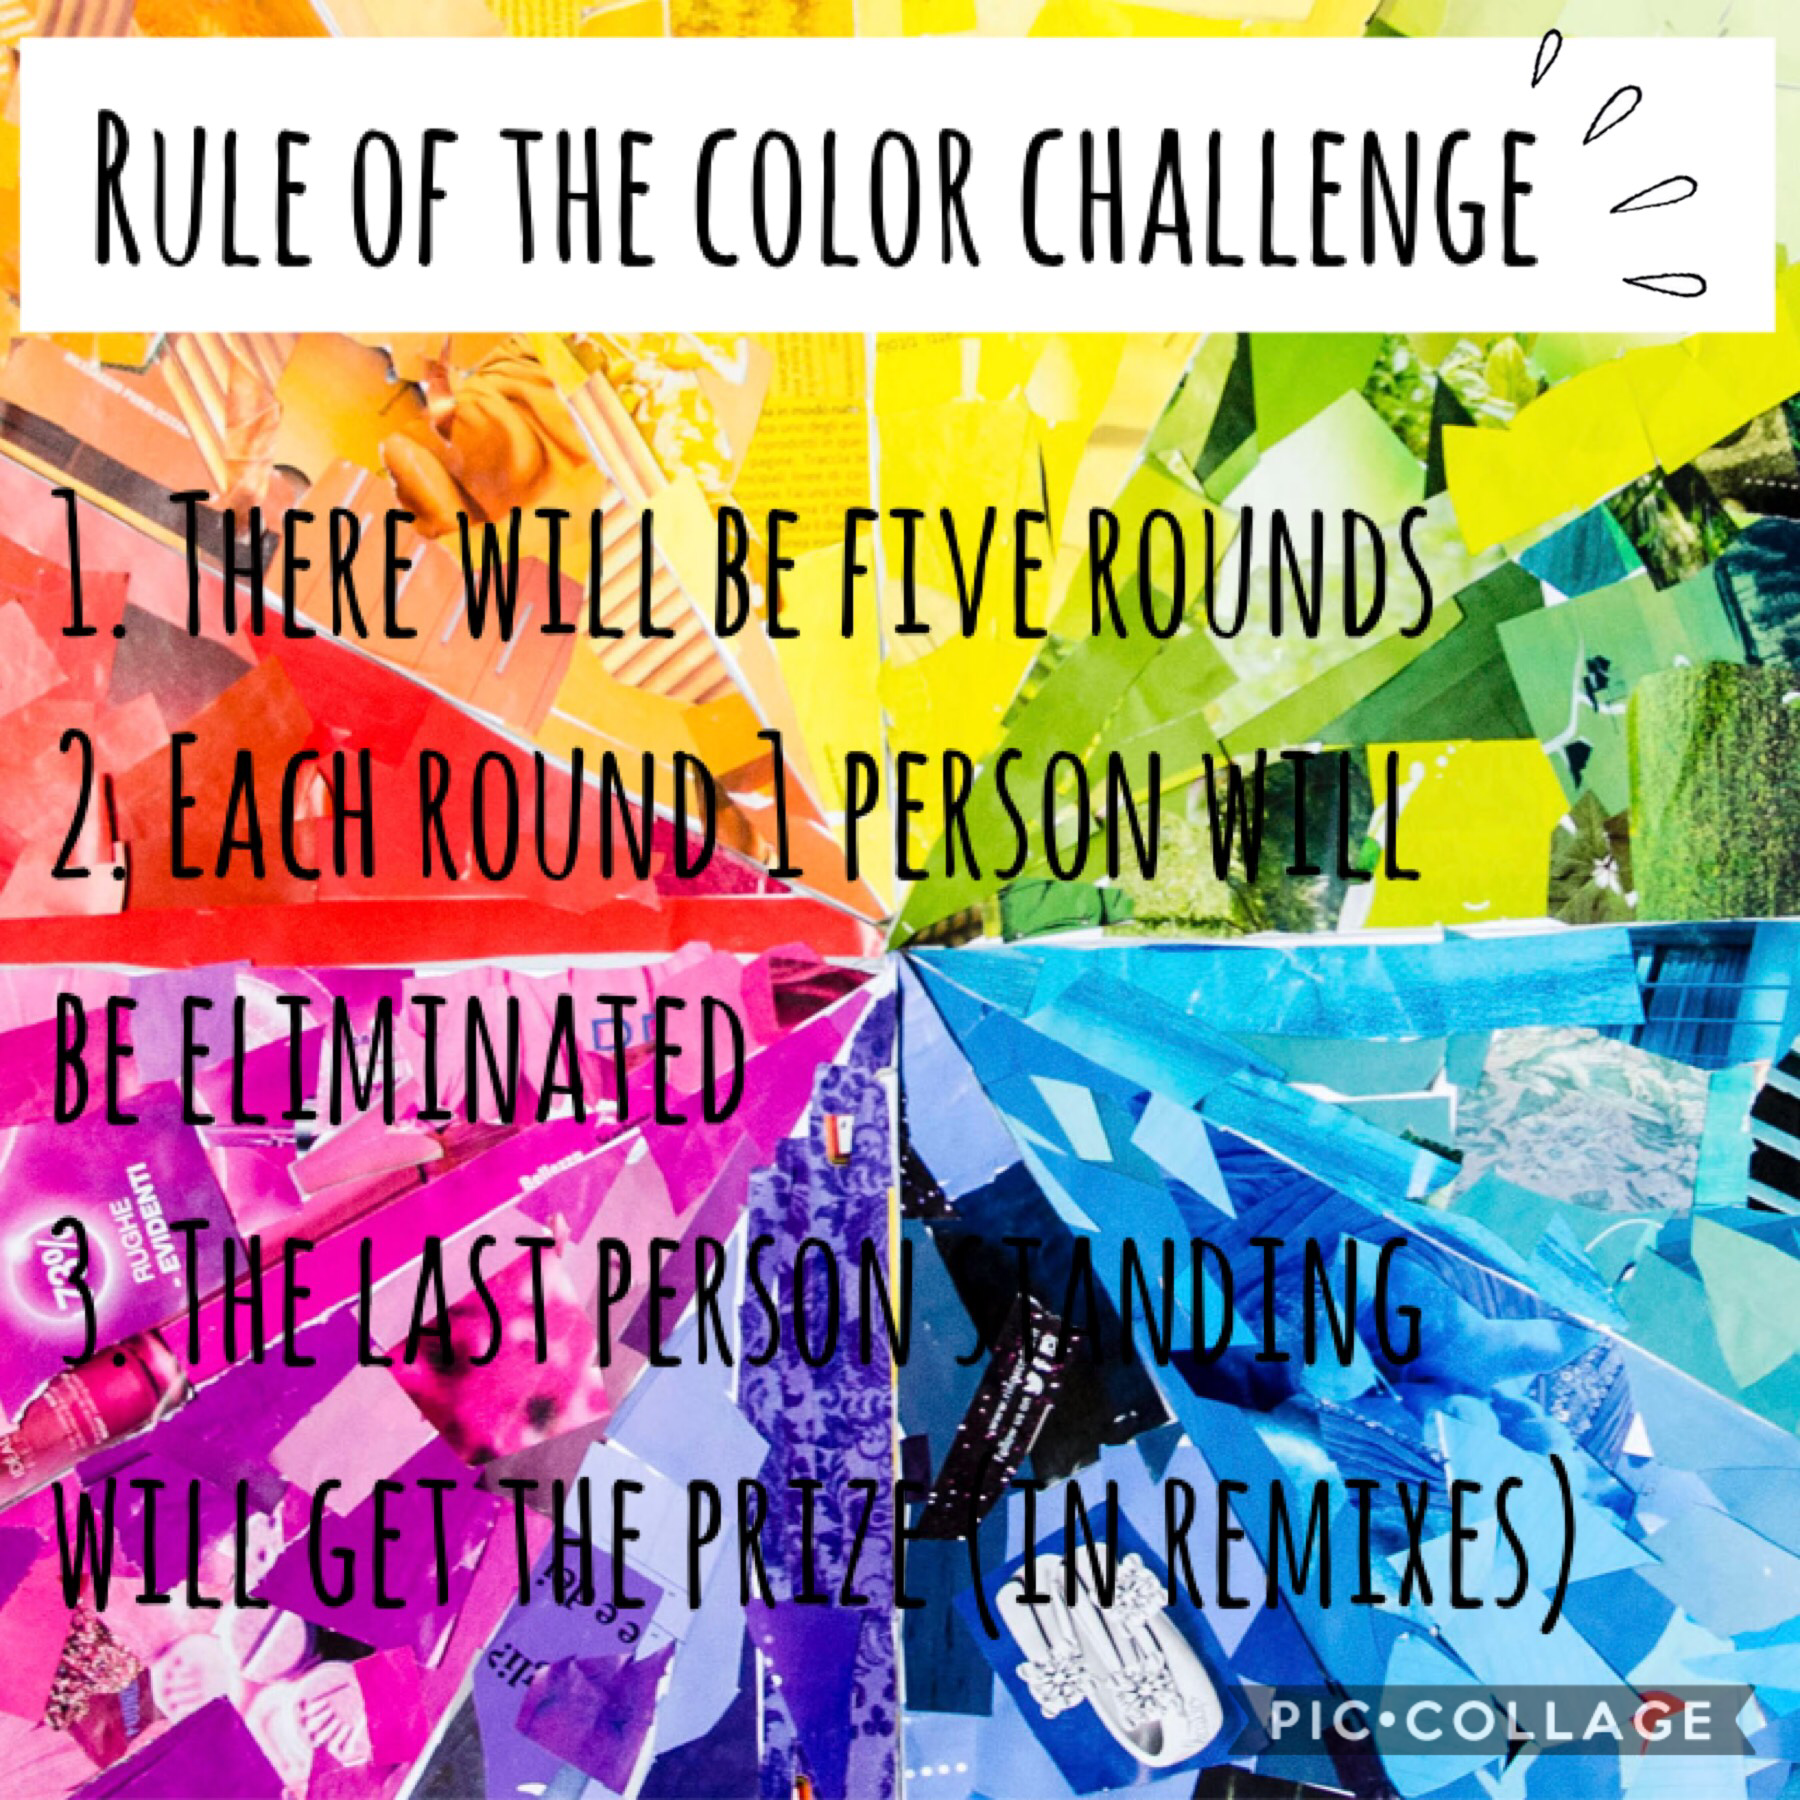 Rules to the color challenge🌈